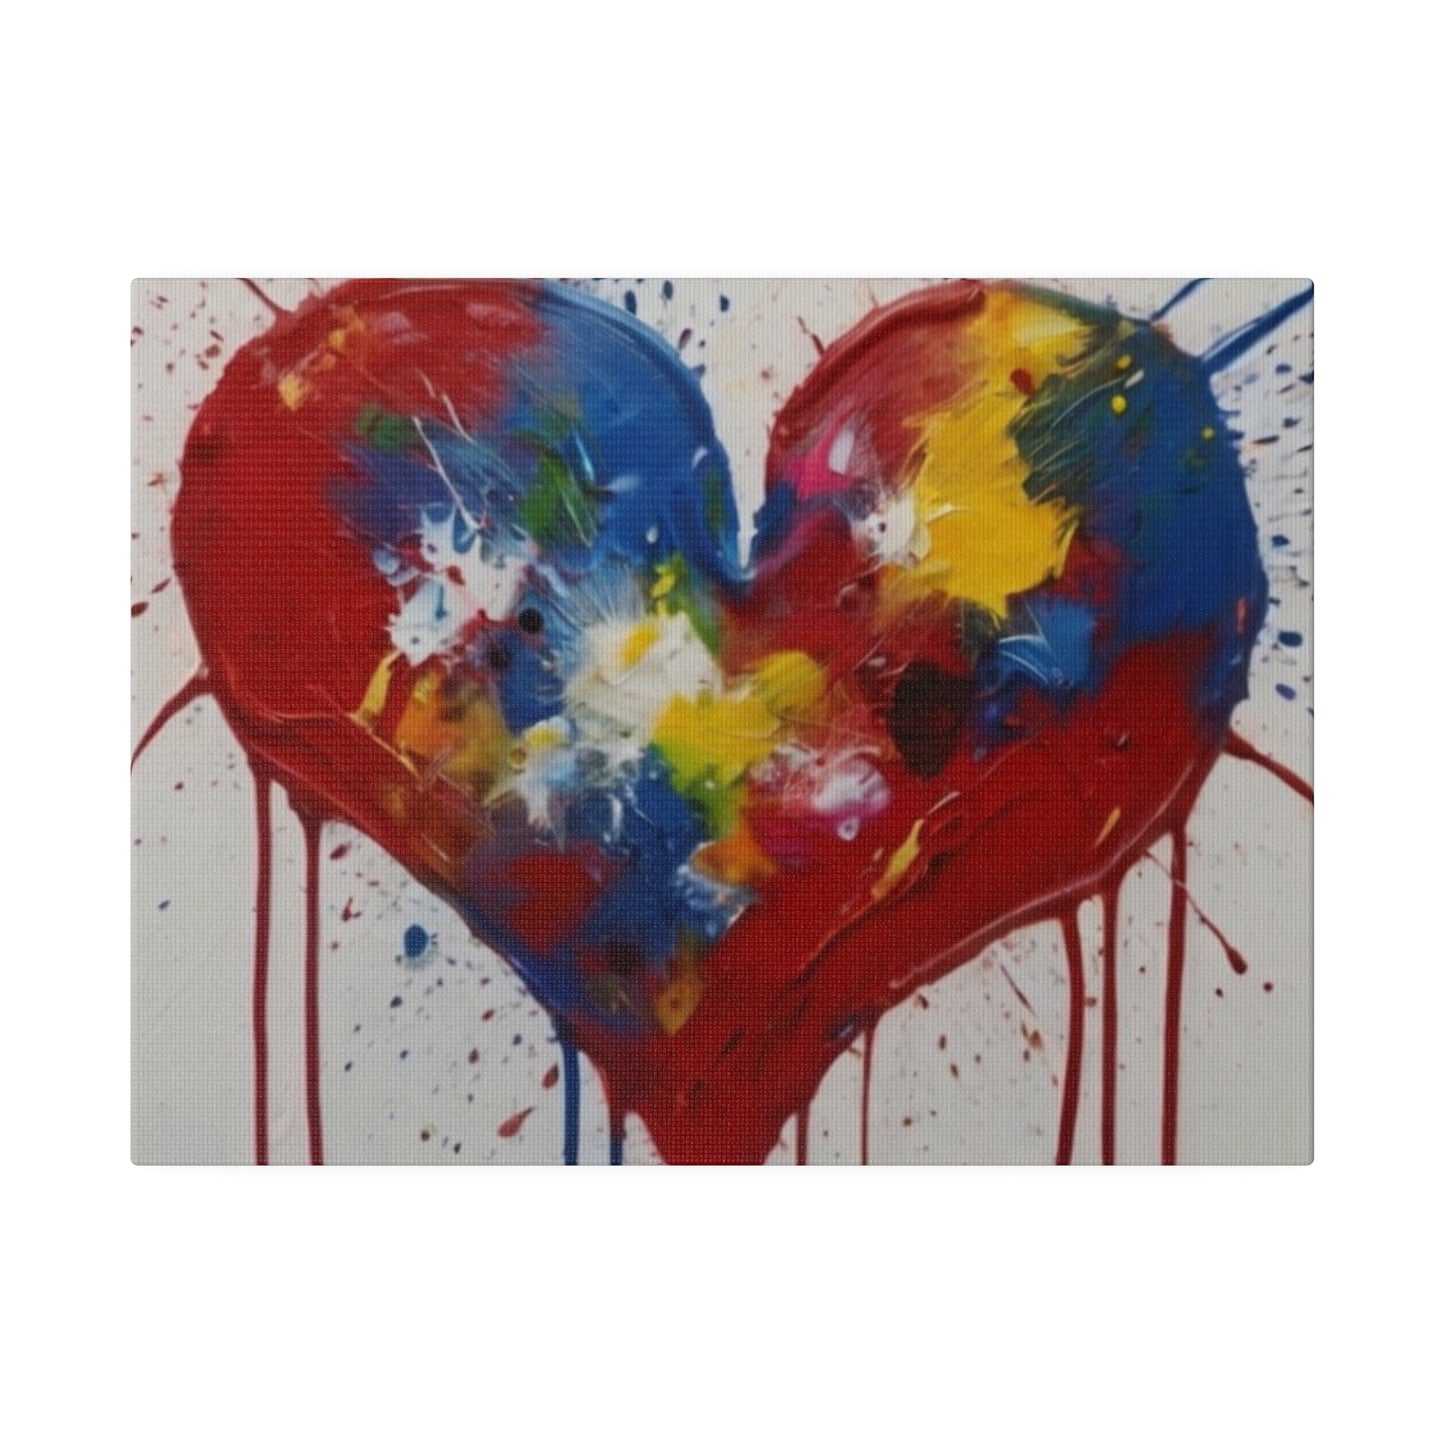 Messy Painted Love Heart - Matte Canvas, Stretched, 0.75"